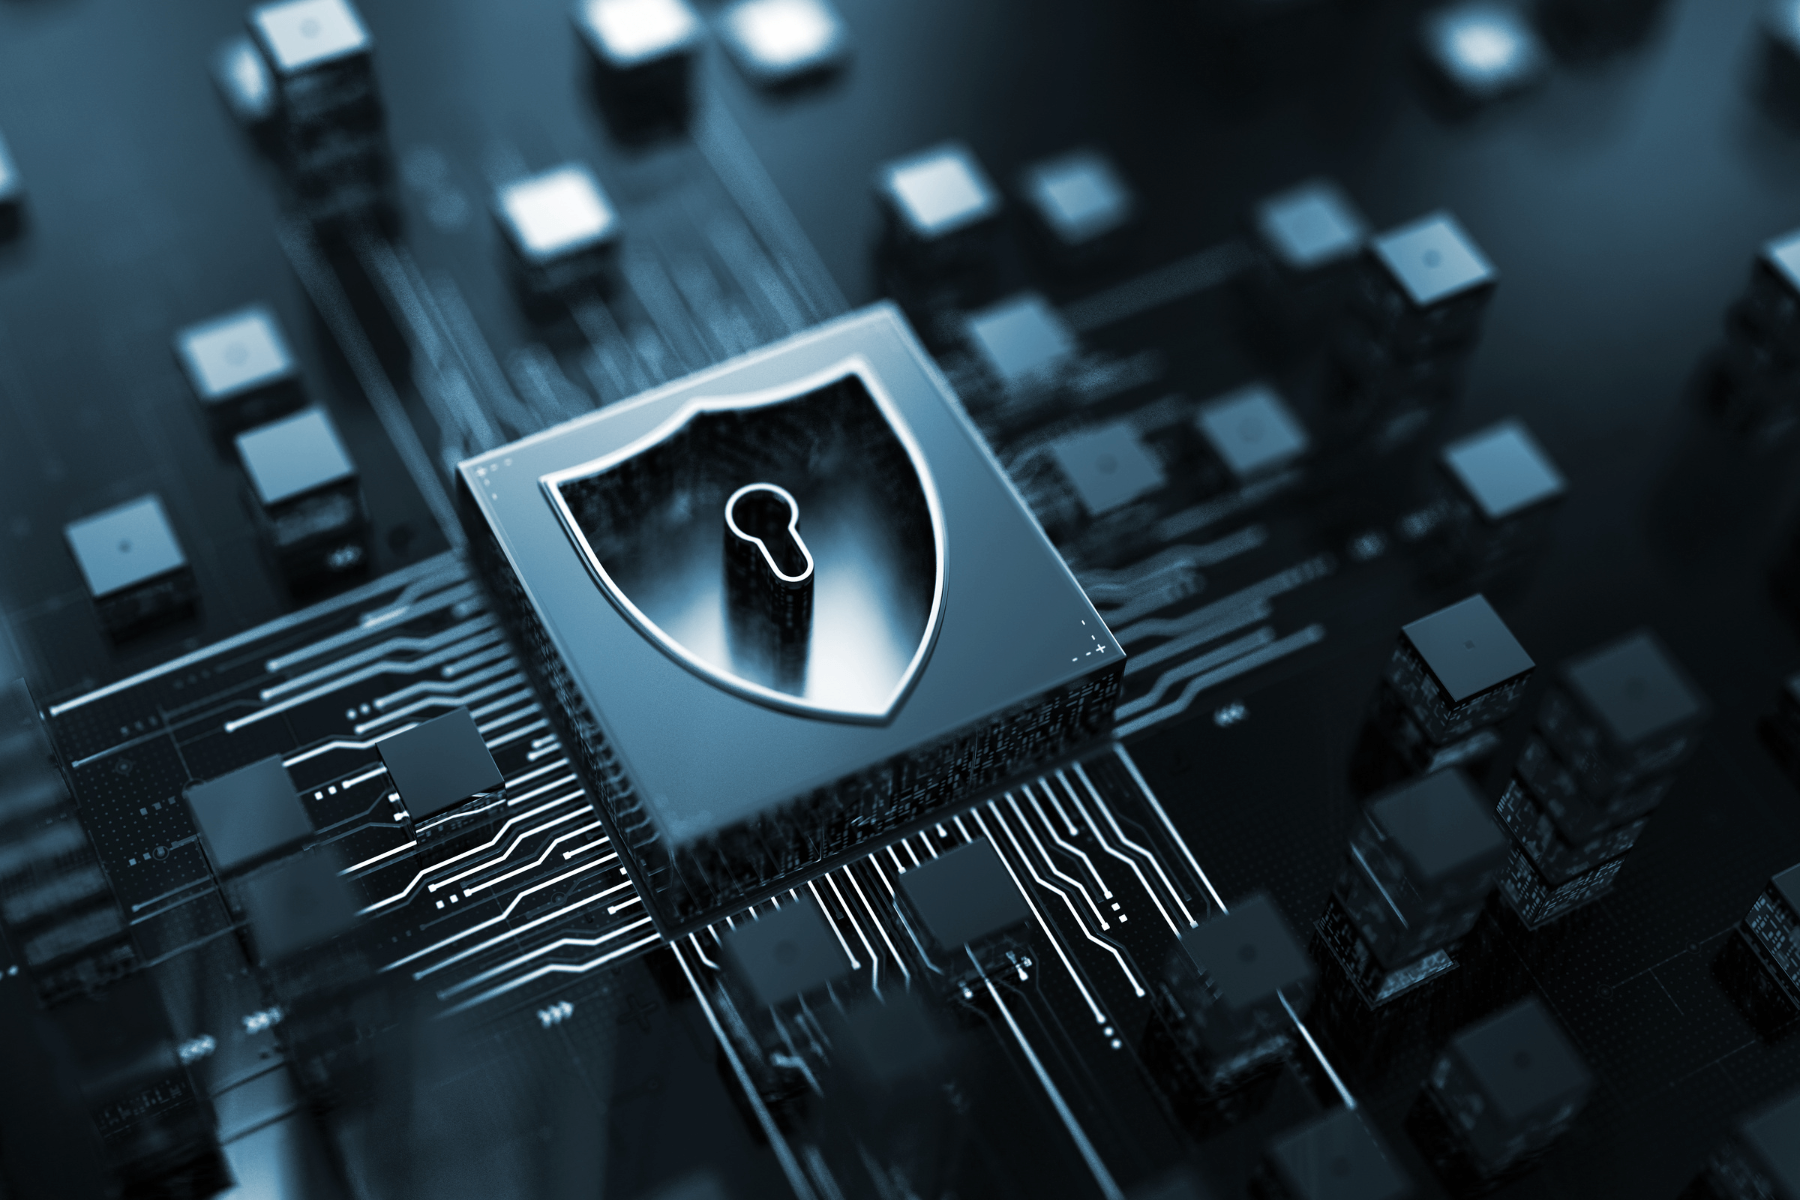 A digital shield icon symbolising cybersecurity on a blue-tinted motherboard with circuits and microchips.